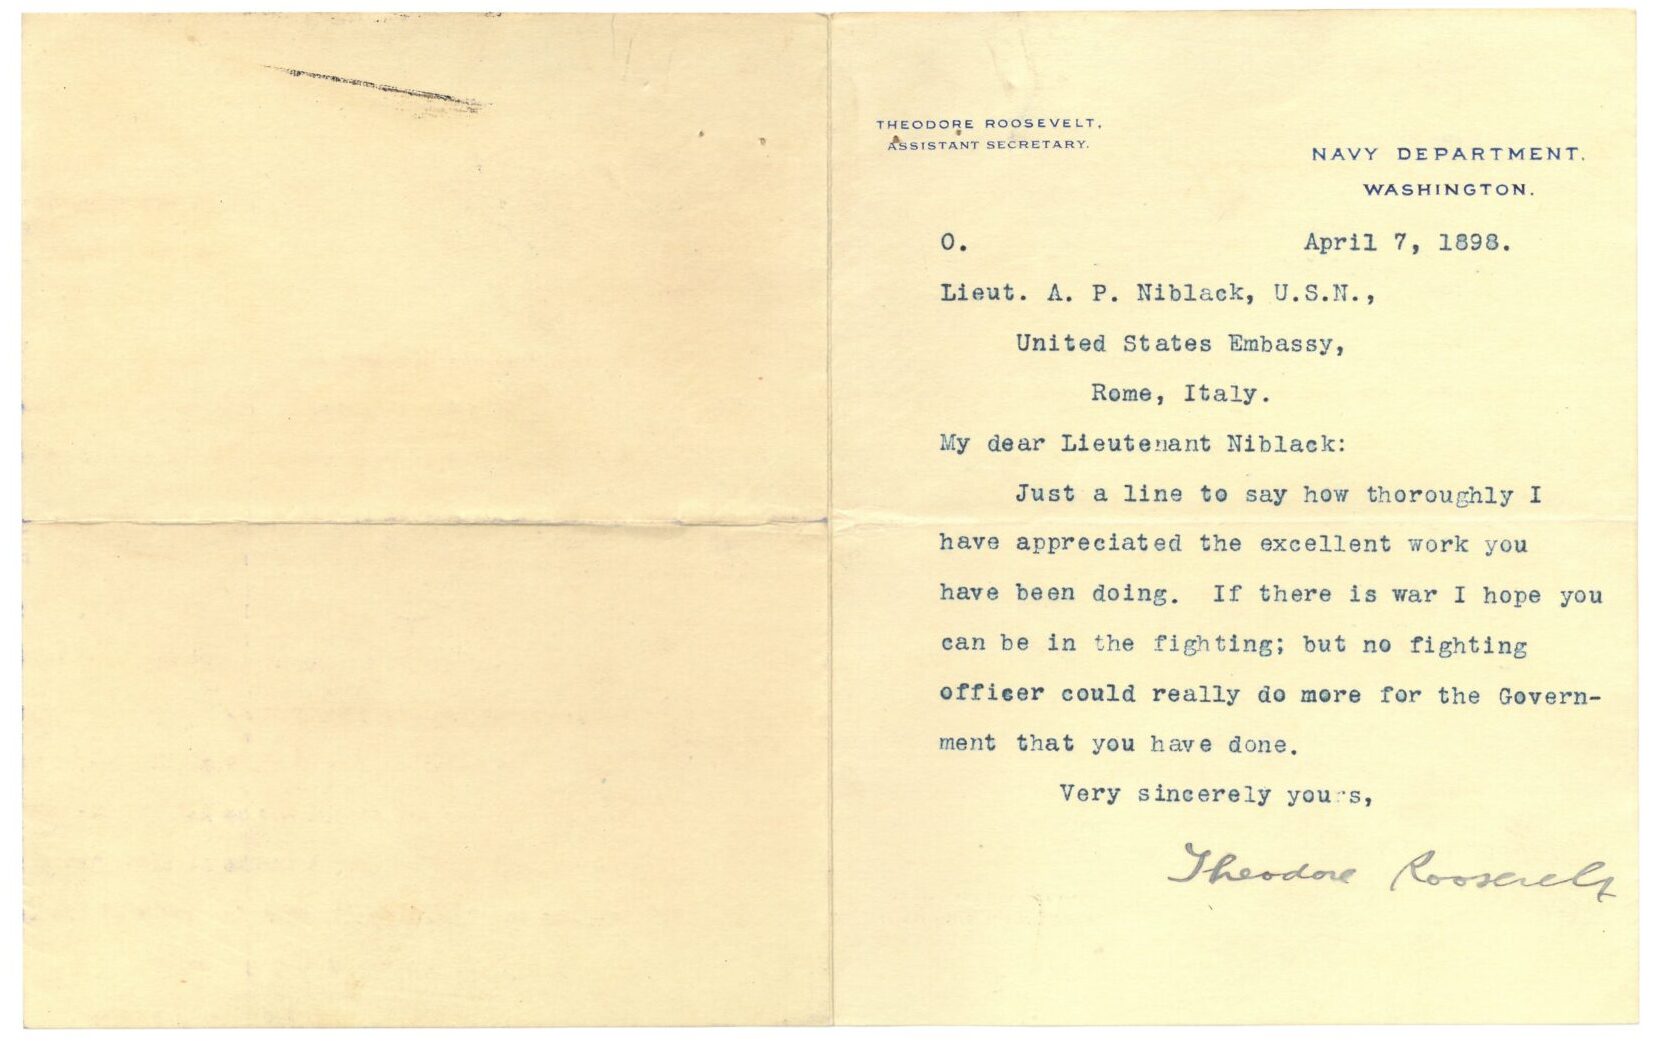 Telegram from Theodore Roosevelt to Lieutenant A. P. Niblack.